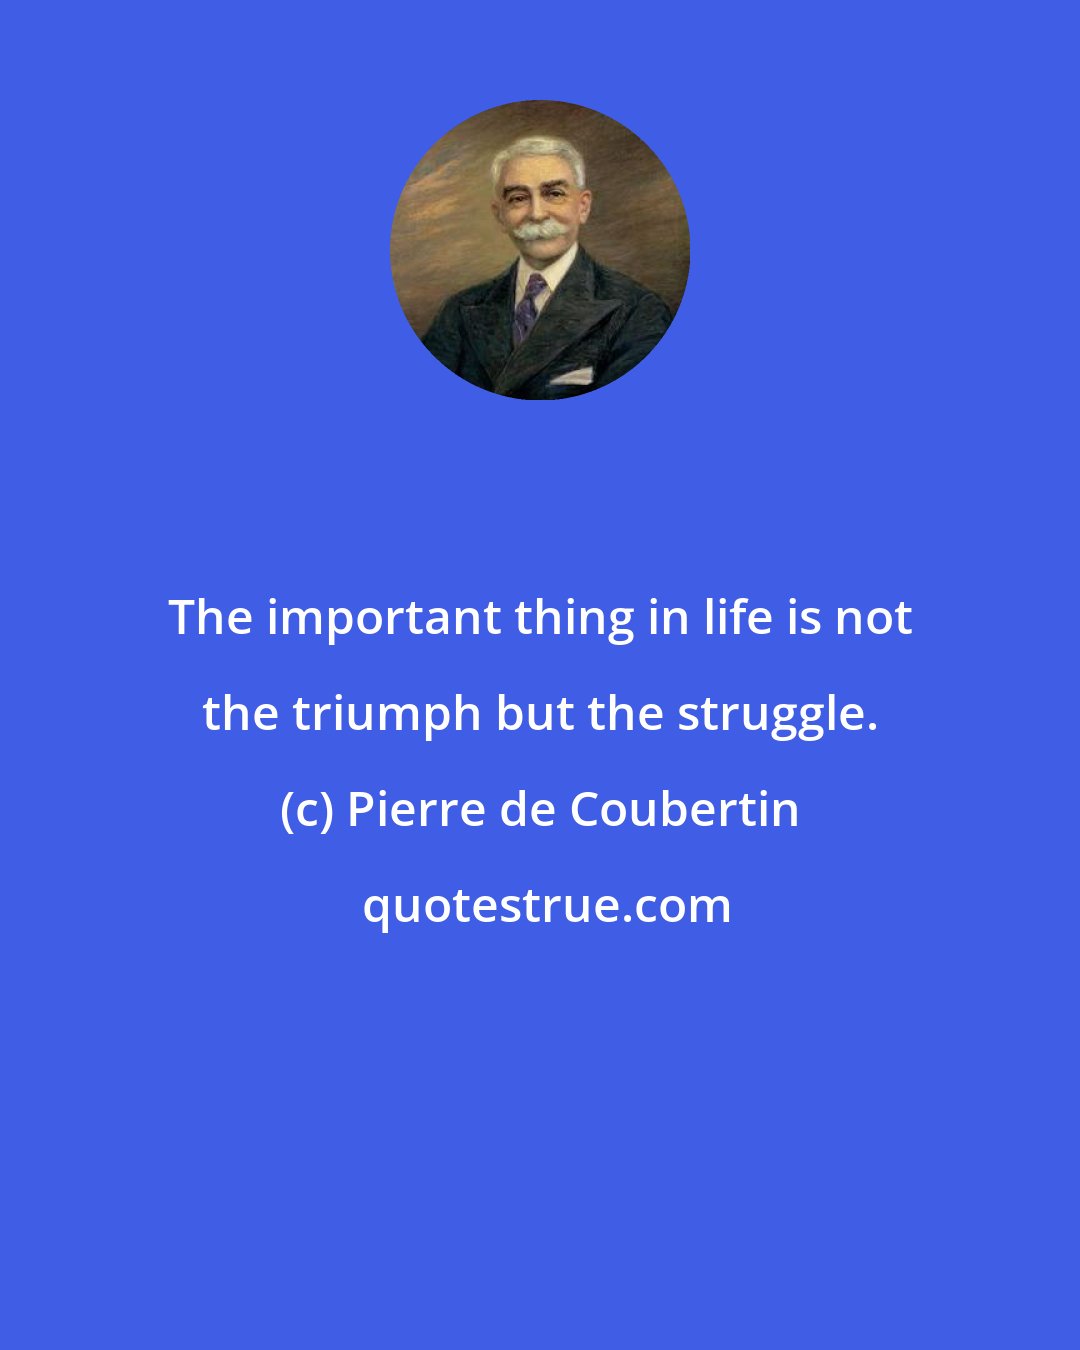 Pierre de Coubertin: The important thing in life is not the triumph but the struggle.